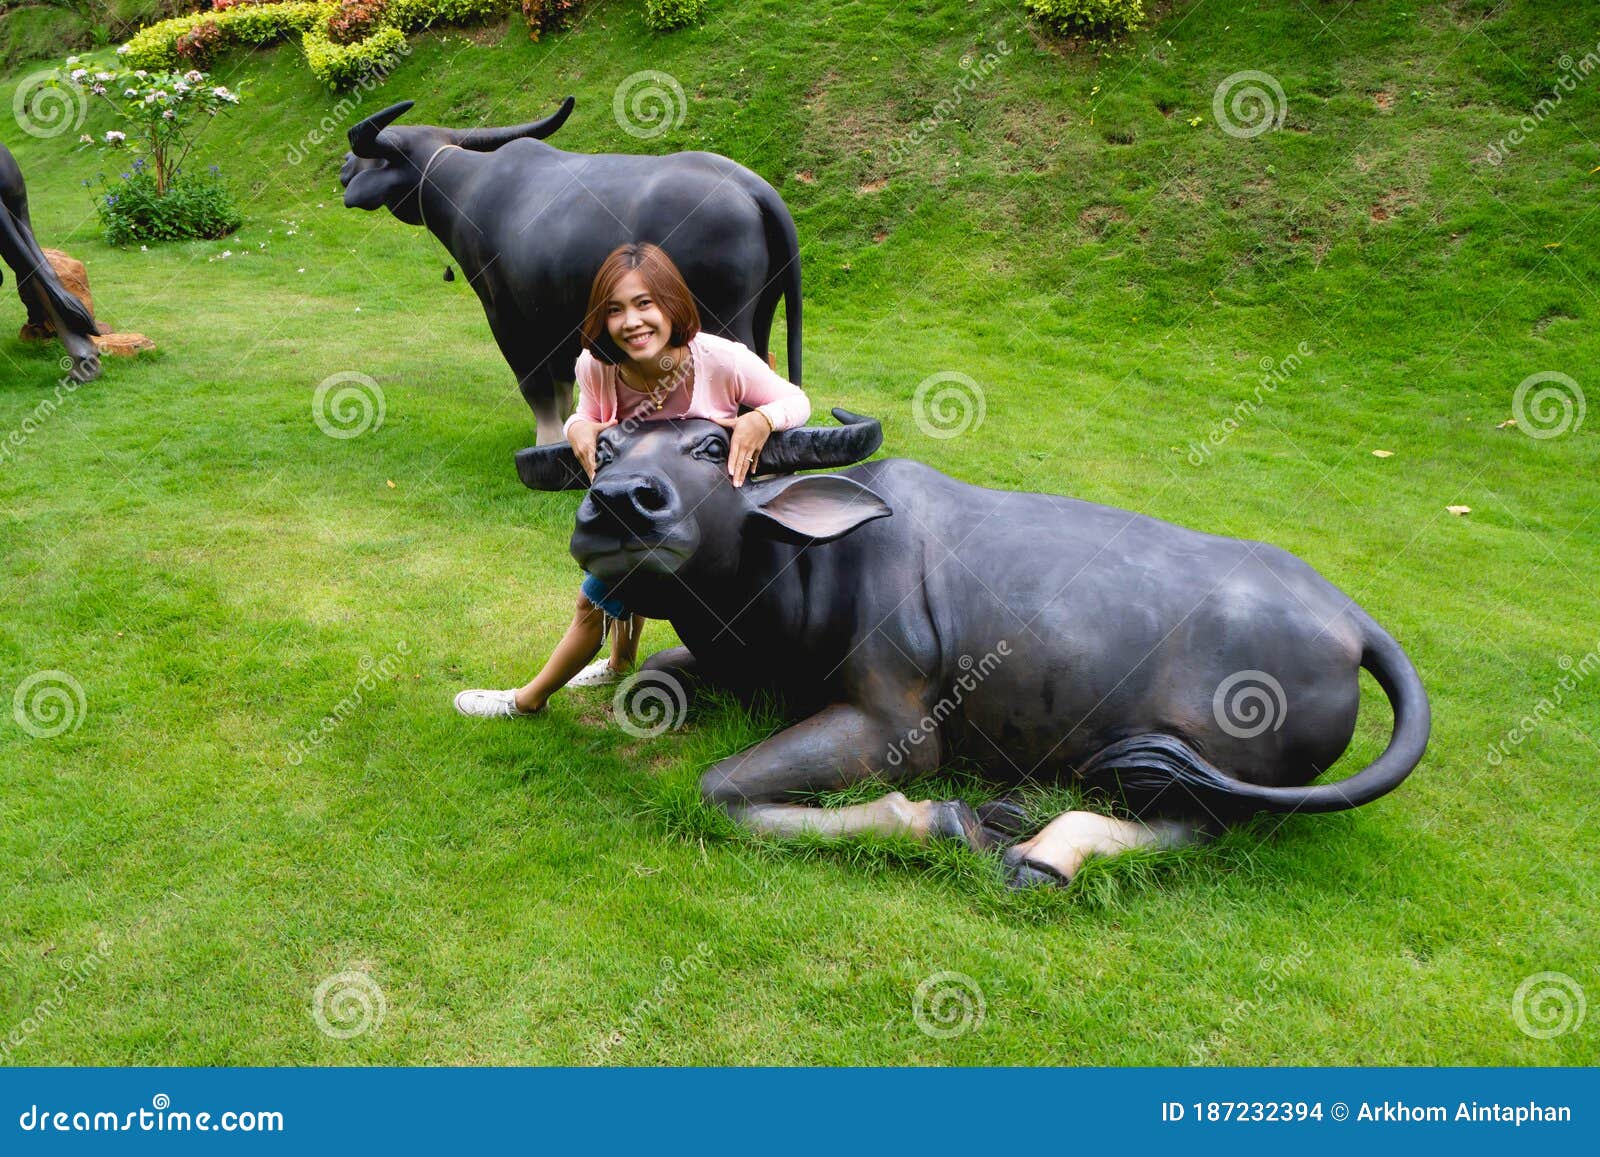 Sky Intuition spisekammer Buffalo stock photo. Image of agriculture, human, beautiful - 187232394